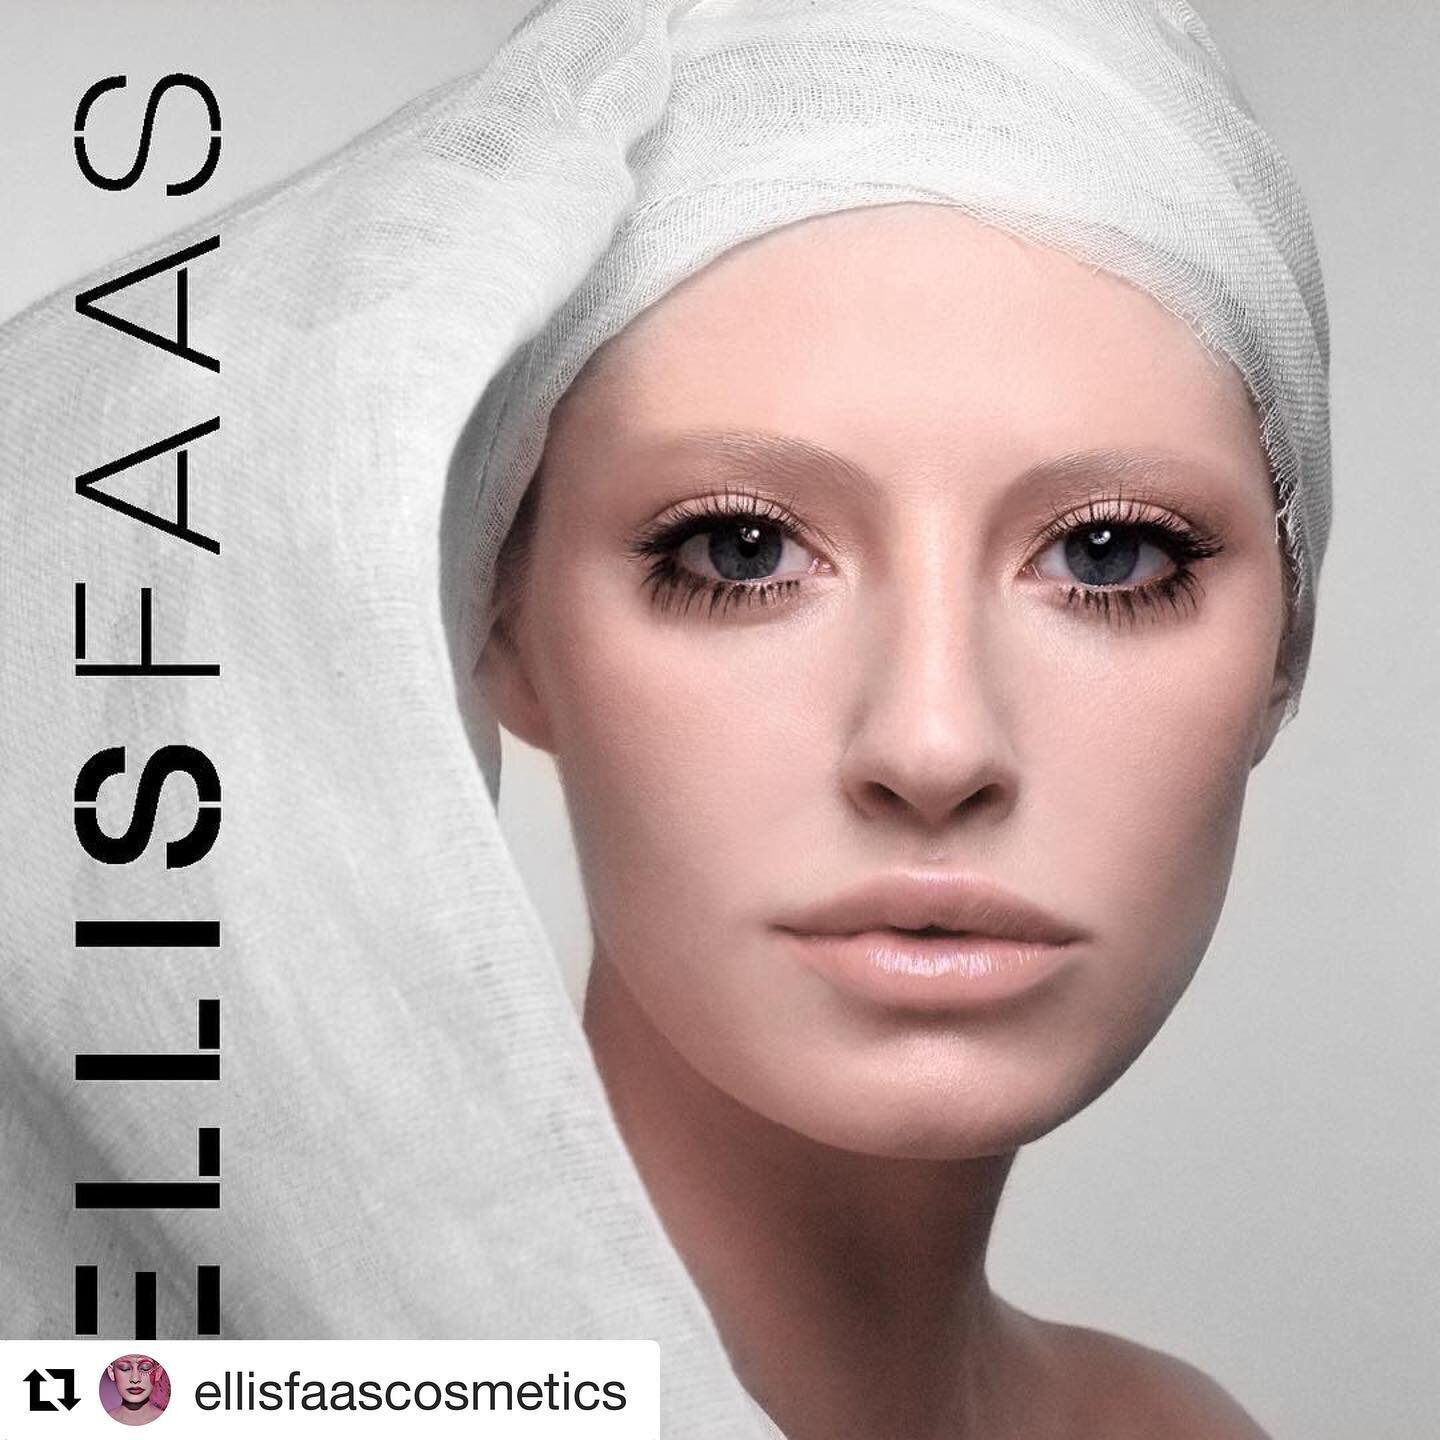 Our condolences to the @ellisfaascosmetics team. Ellis&rsquo;s vision truly changed the beauty industry, and lives on through her products that we could not live without. #makeupnotwar